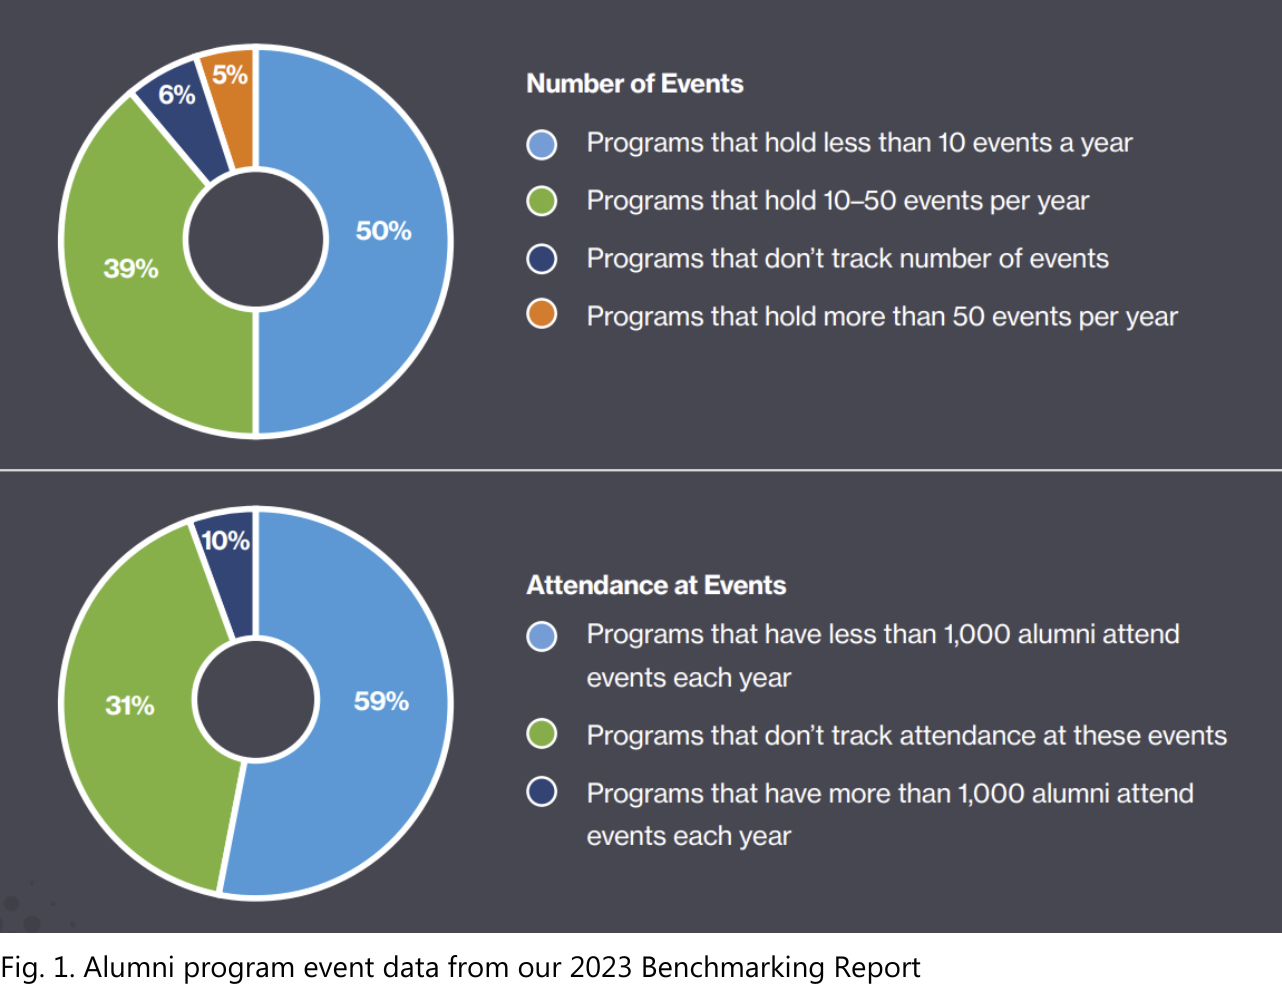 Event engagement data from the 2023 Benchmarking Report